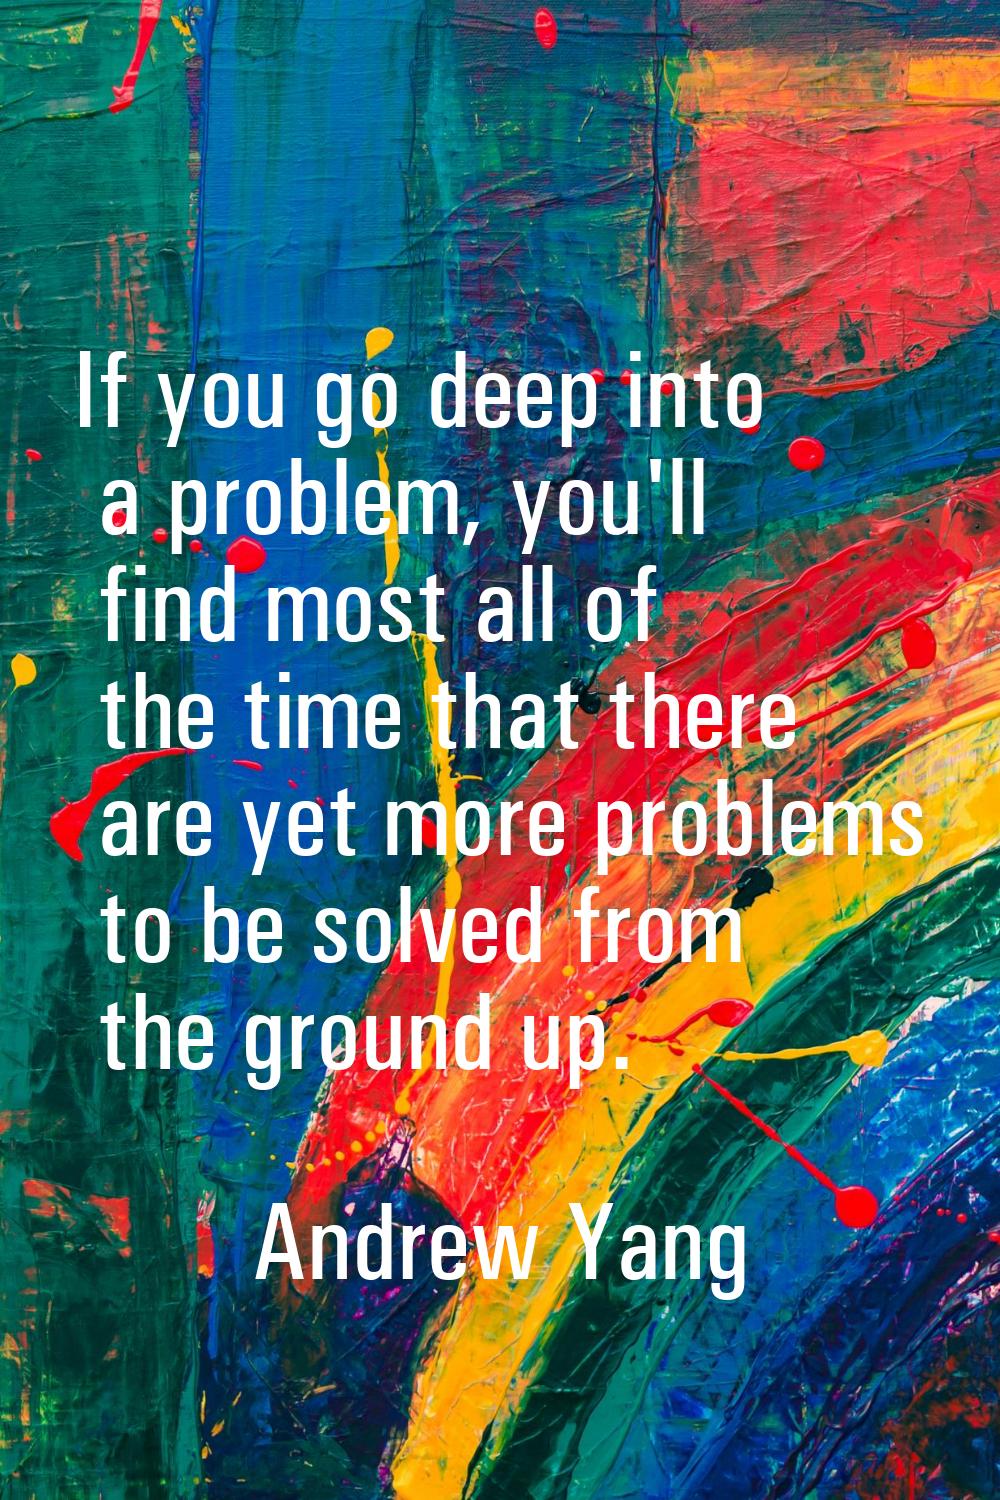 If you go deep into a problem, you'll find most all of the time that there are yet more problems to